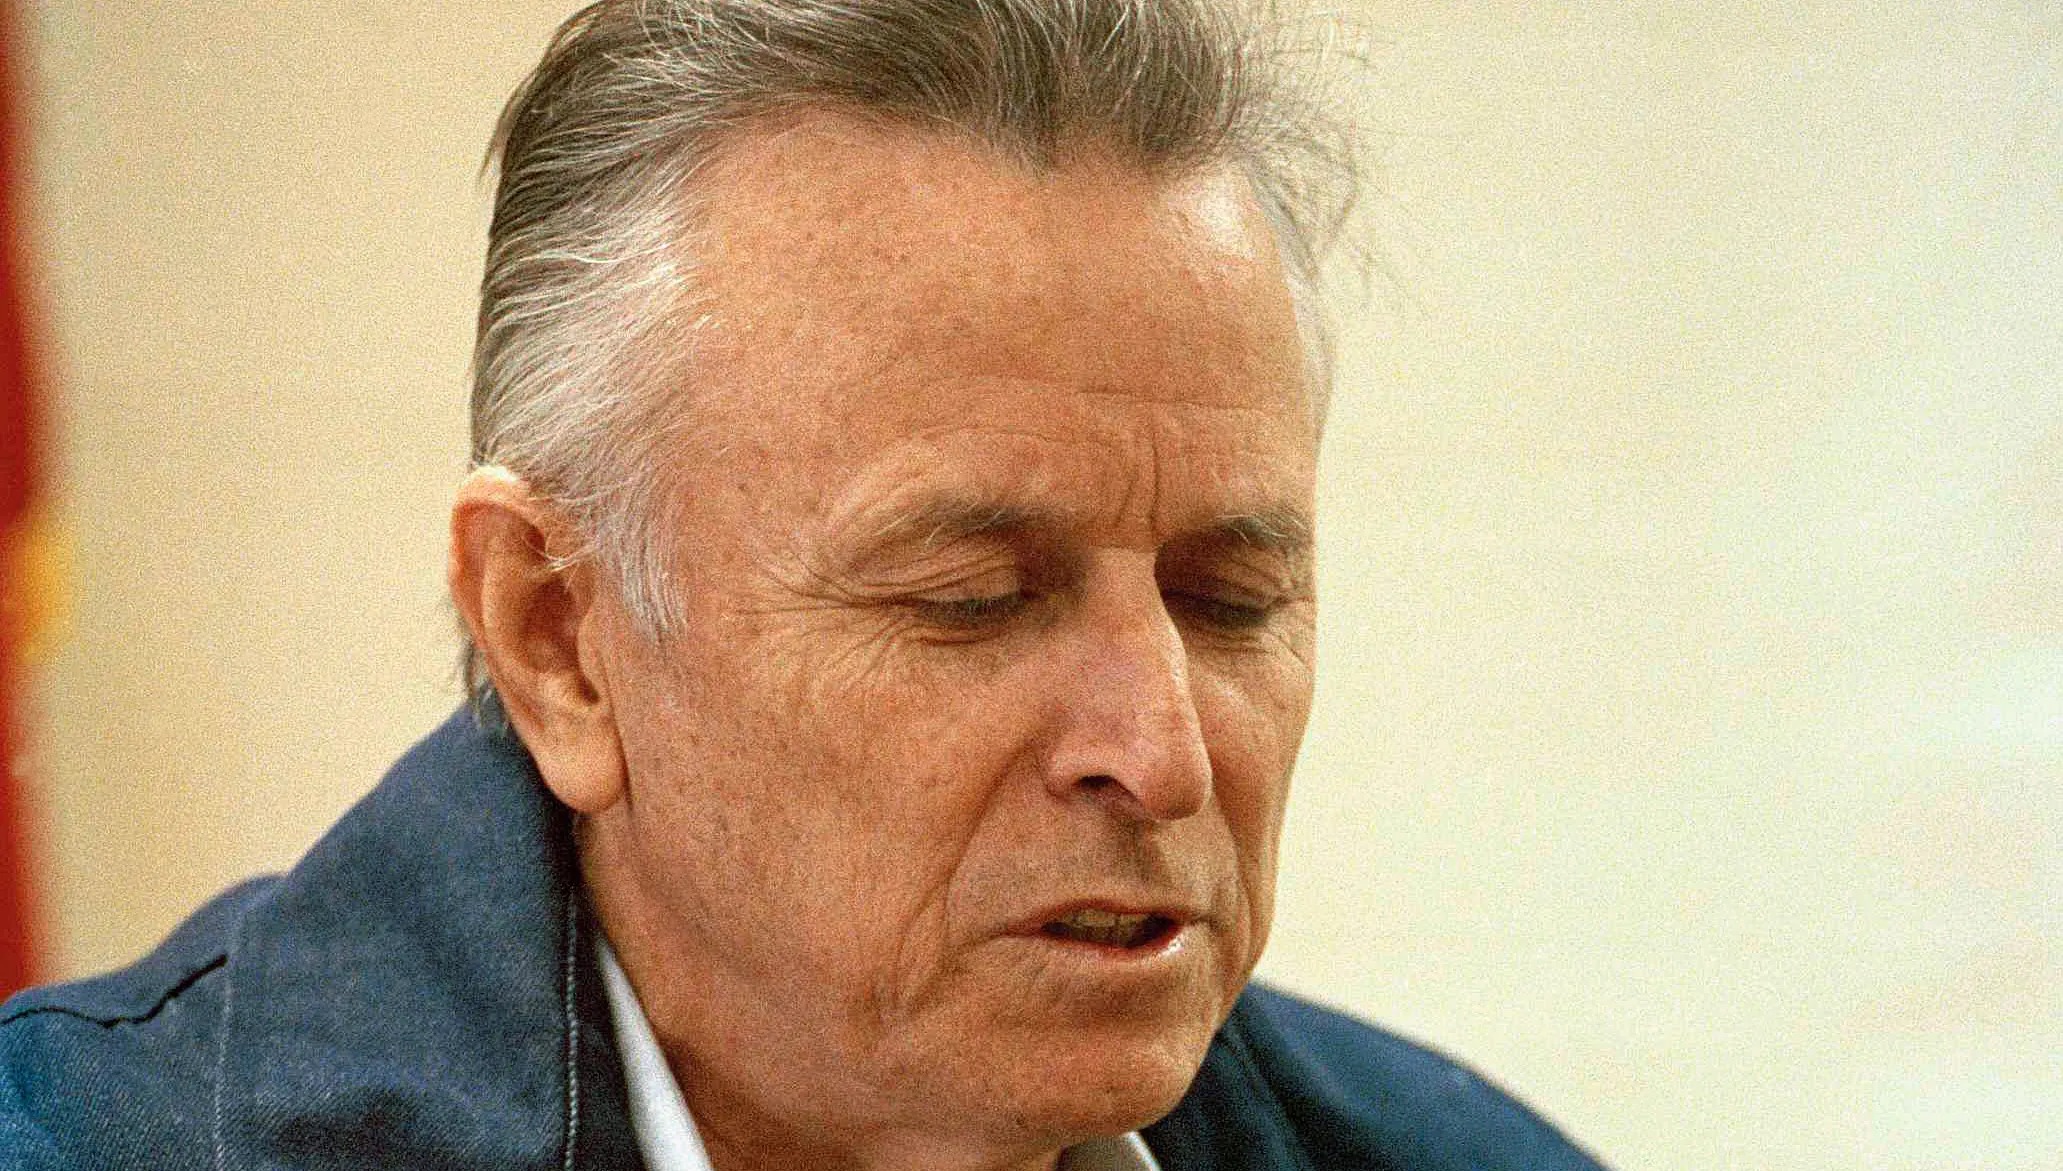 that James Earl Ray's brother once tried to sell a videotape of his brother's autopsy for $400K.